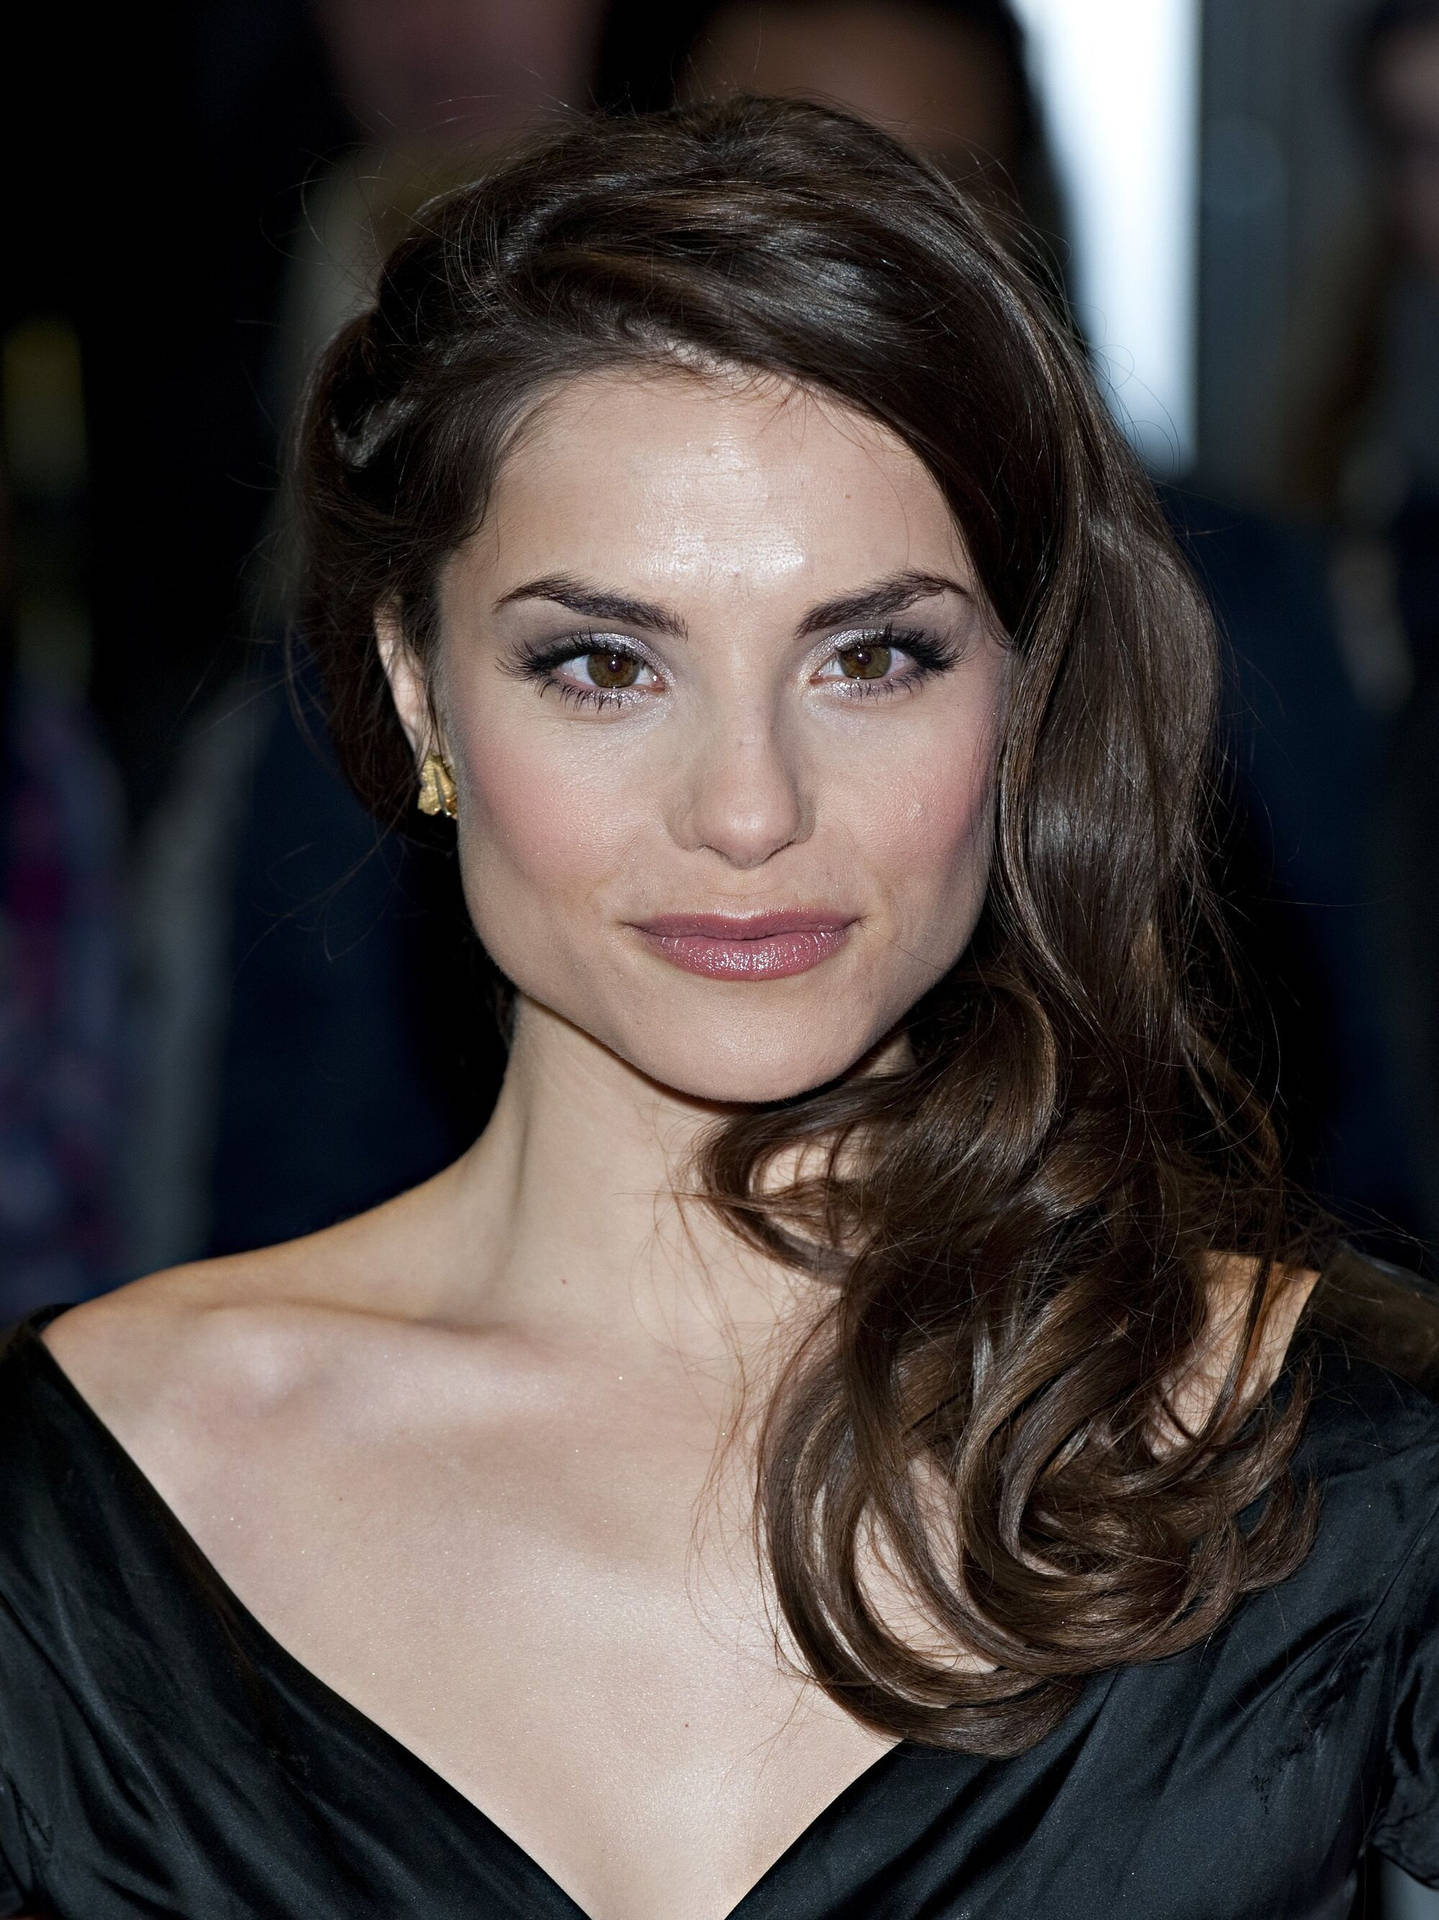 Charlotte Riley radiating elegance in a stunning outfit Wallpaper